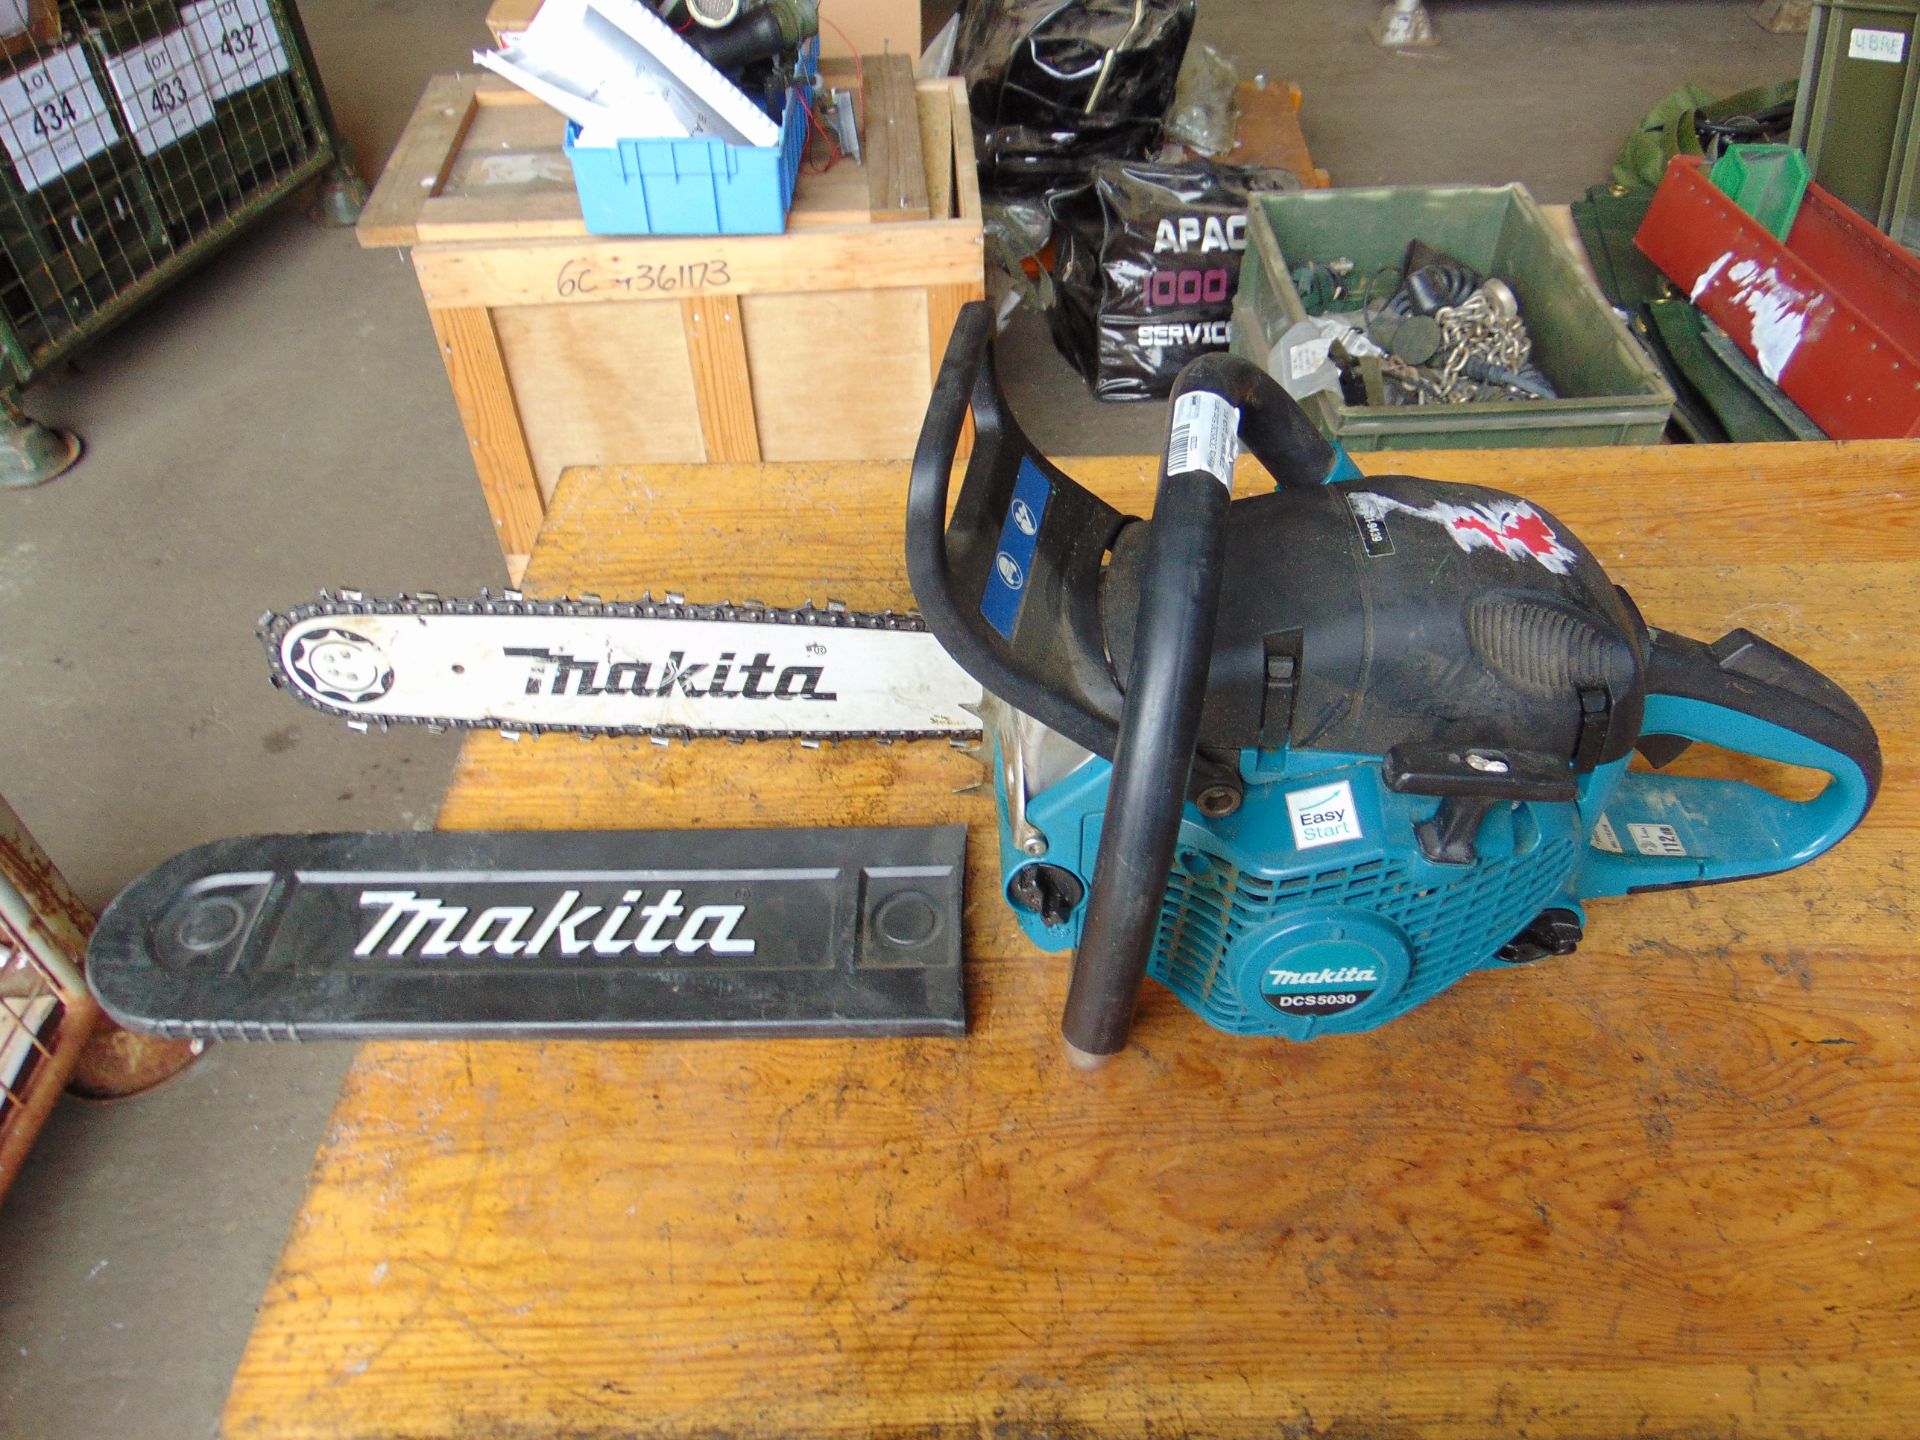 MAKITA DCS 5030 50CC Chainsaw c/w Chain Guard from MoD - Image 2 of 5